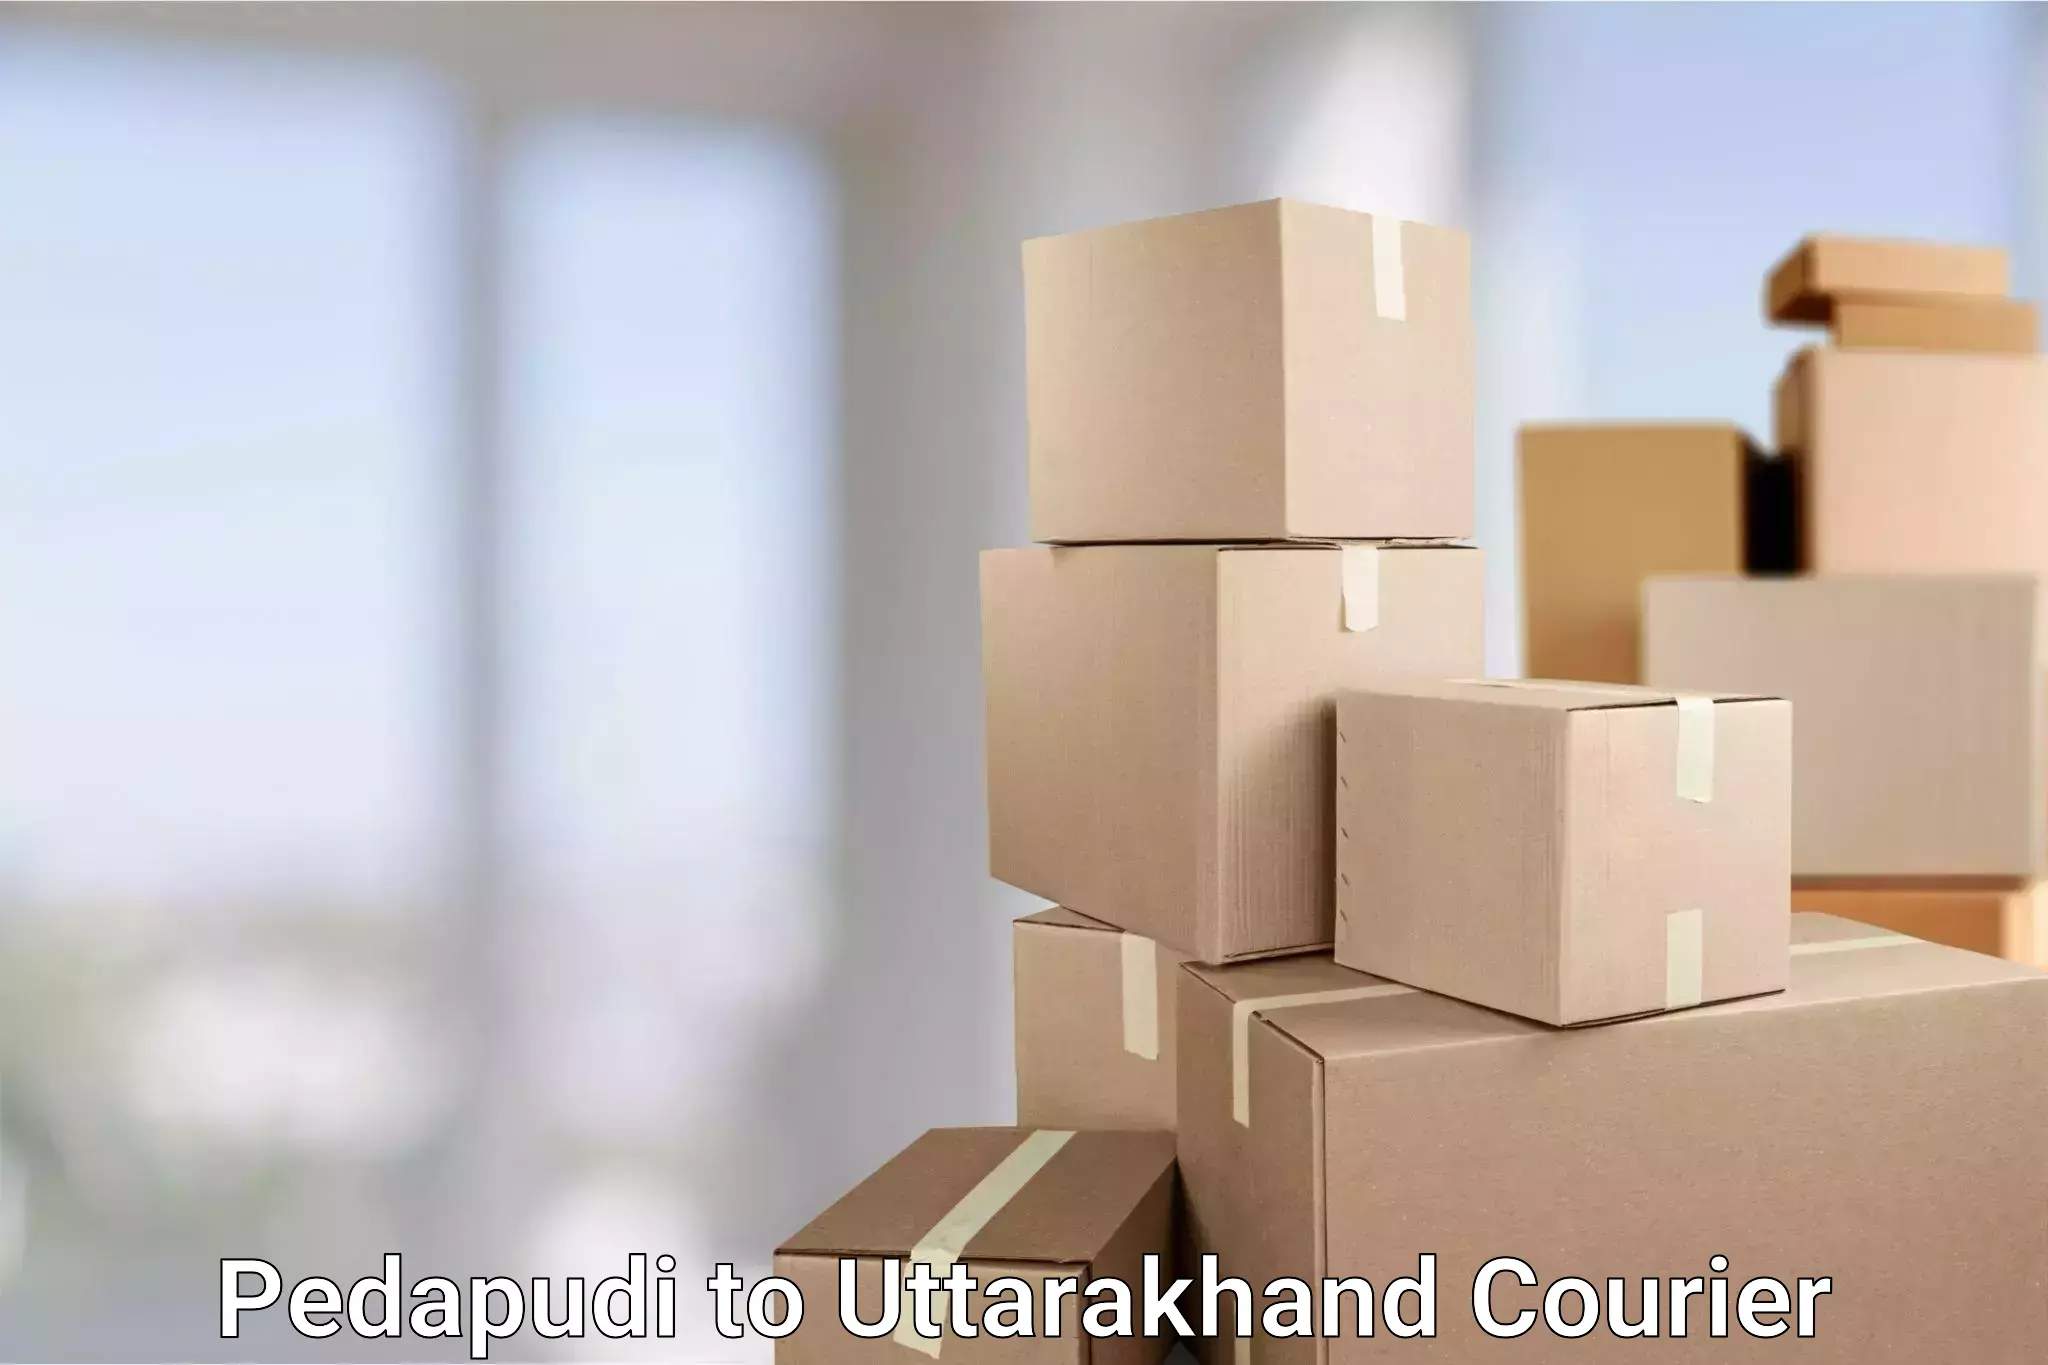 Large package courier Pedapudi to Ranikhet